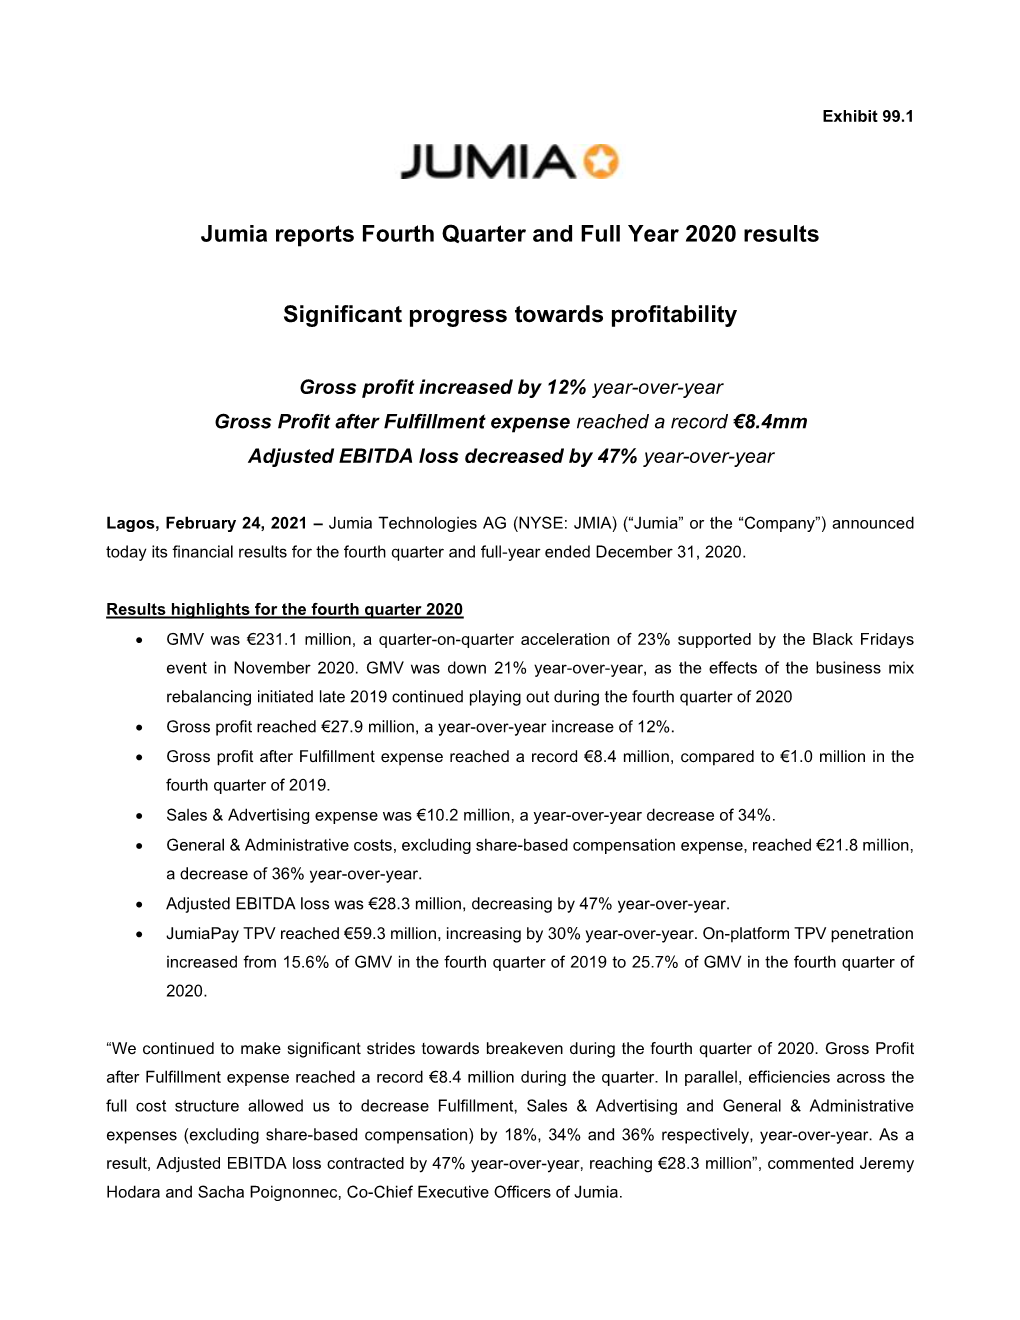 Jumia Reports Fourth Quarter and Full Year 2020 Results Significant